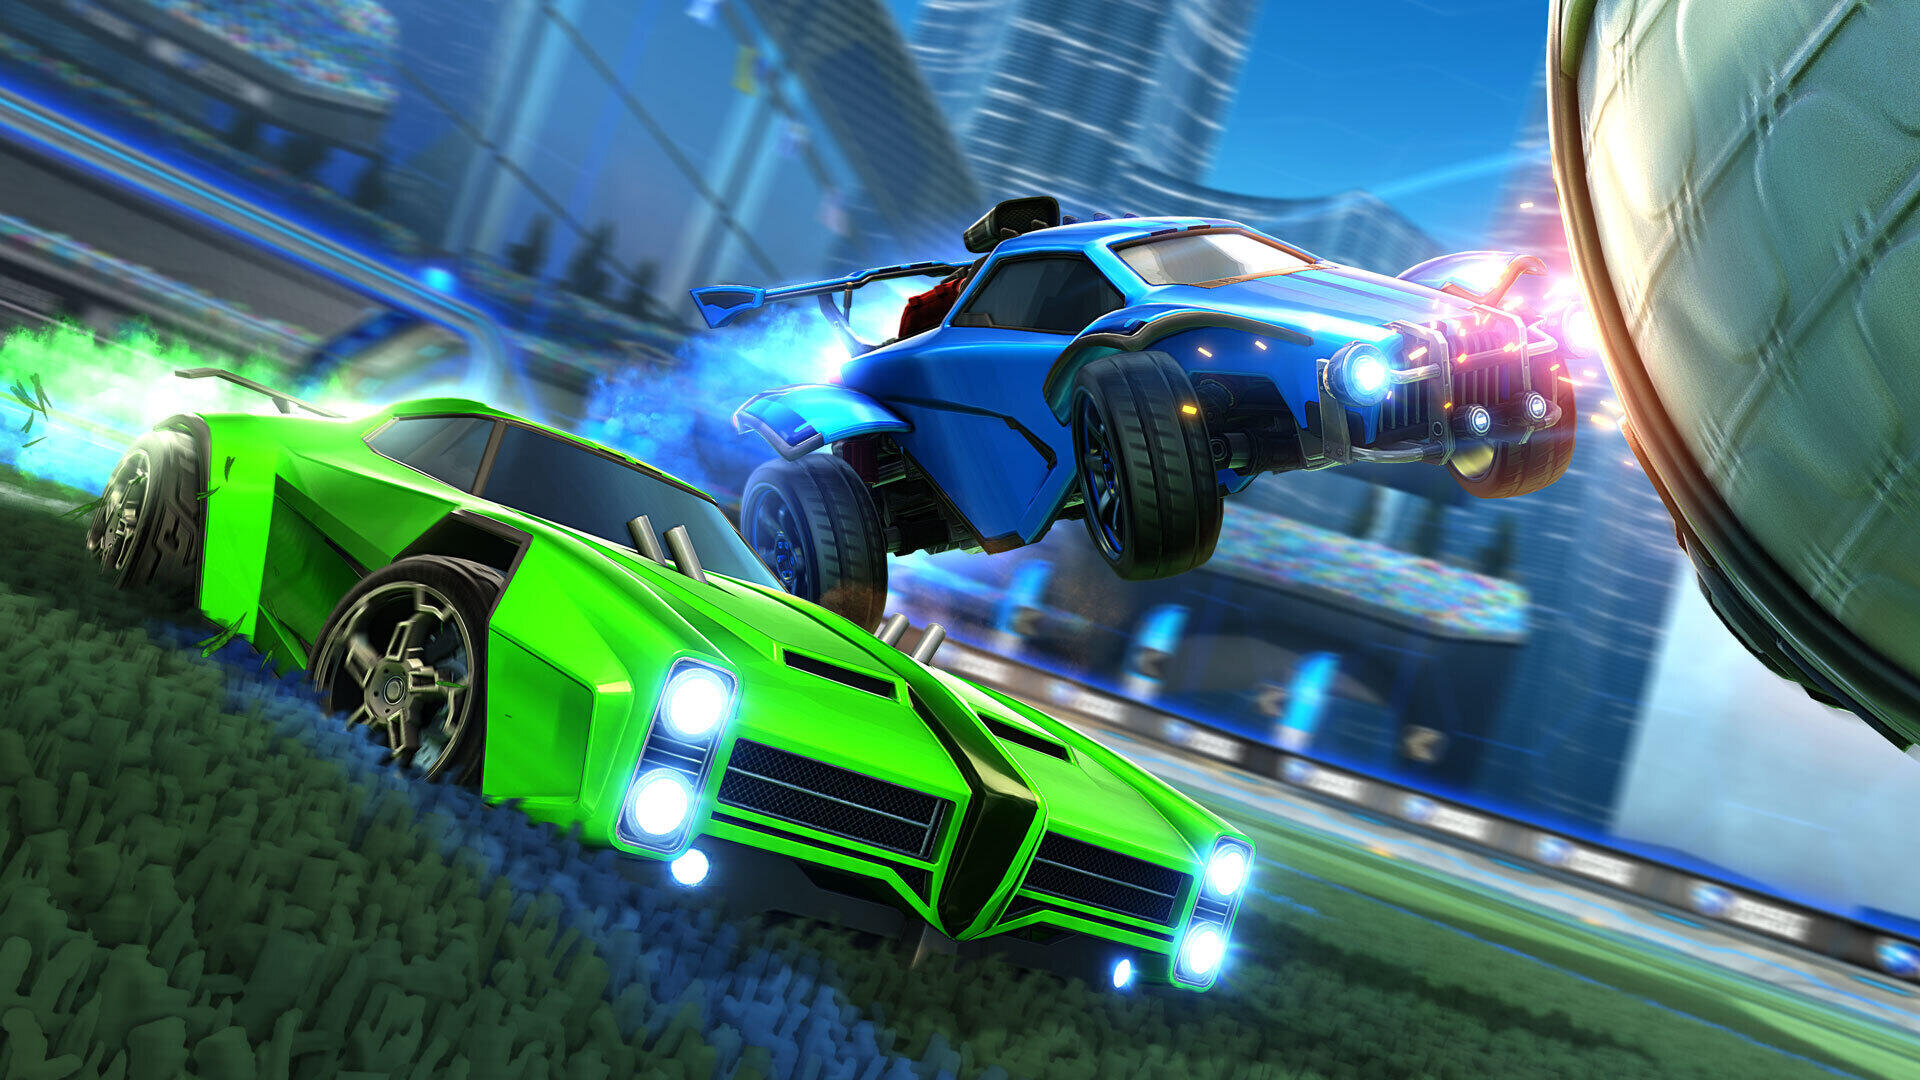 How to play Rocket League Gridiron: Controls and more